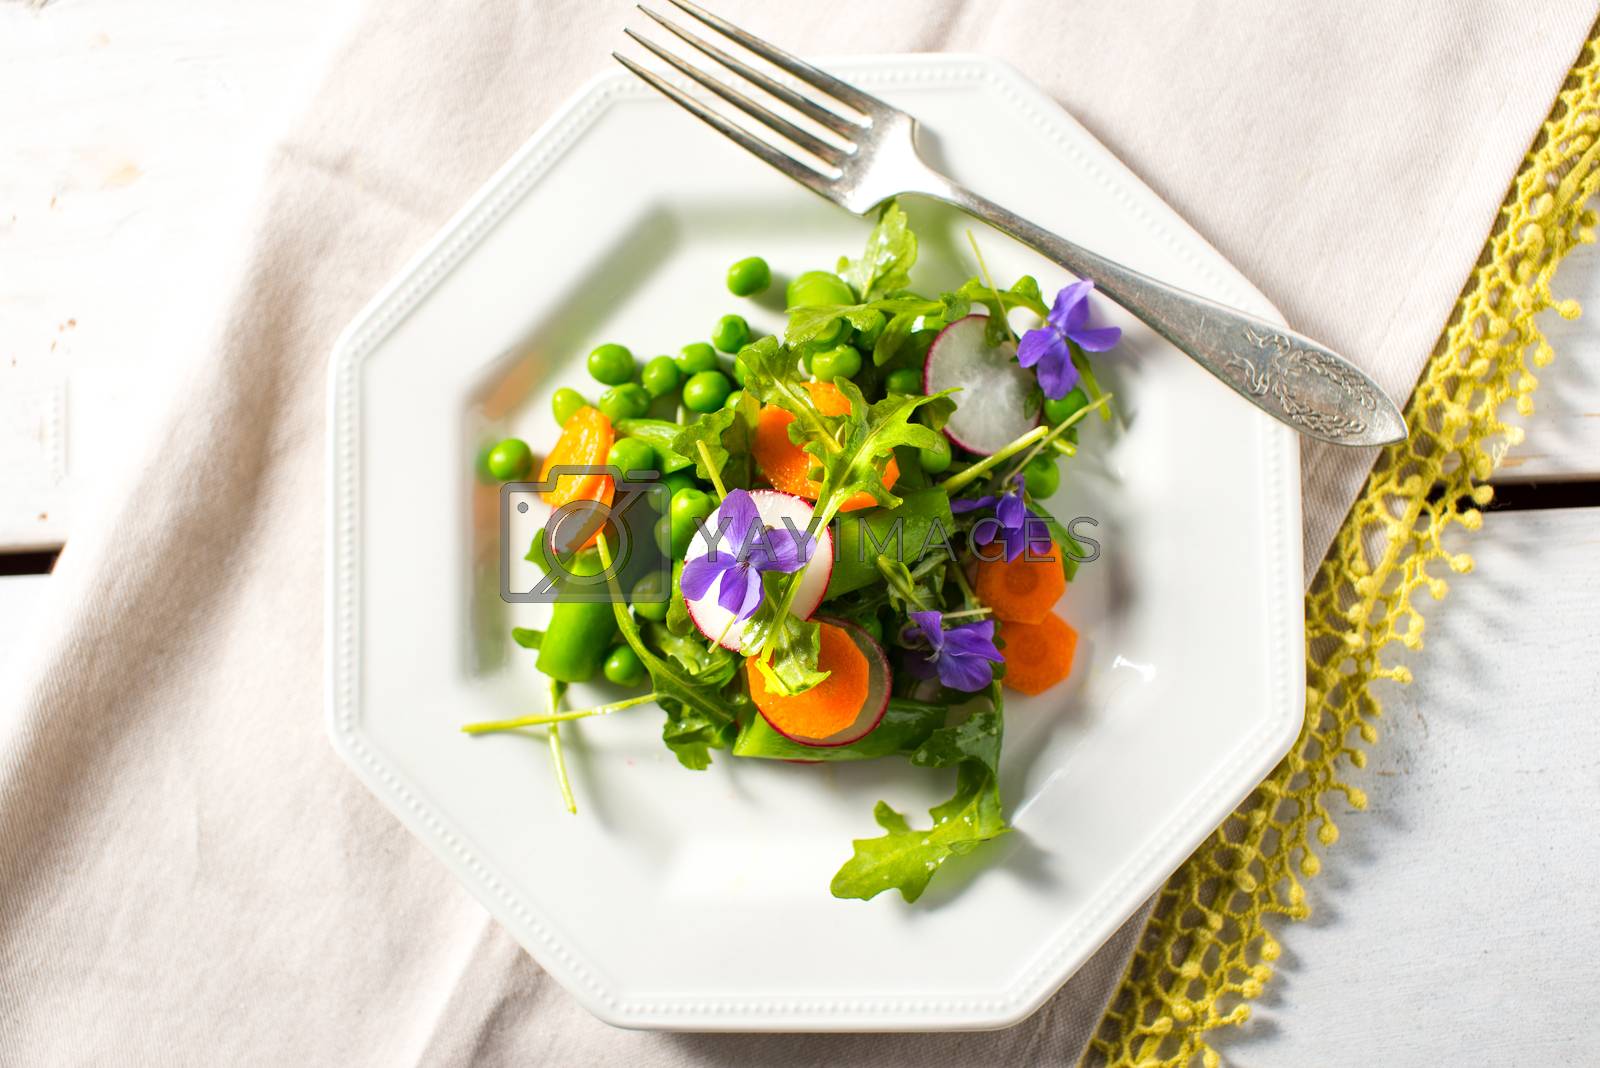 Royalty free image of Spring salad with peas and carrots by Boyrcr420